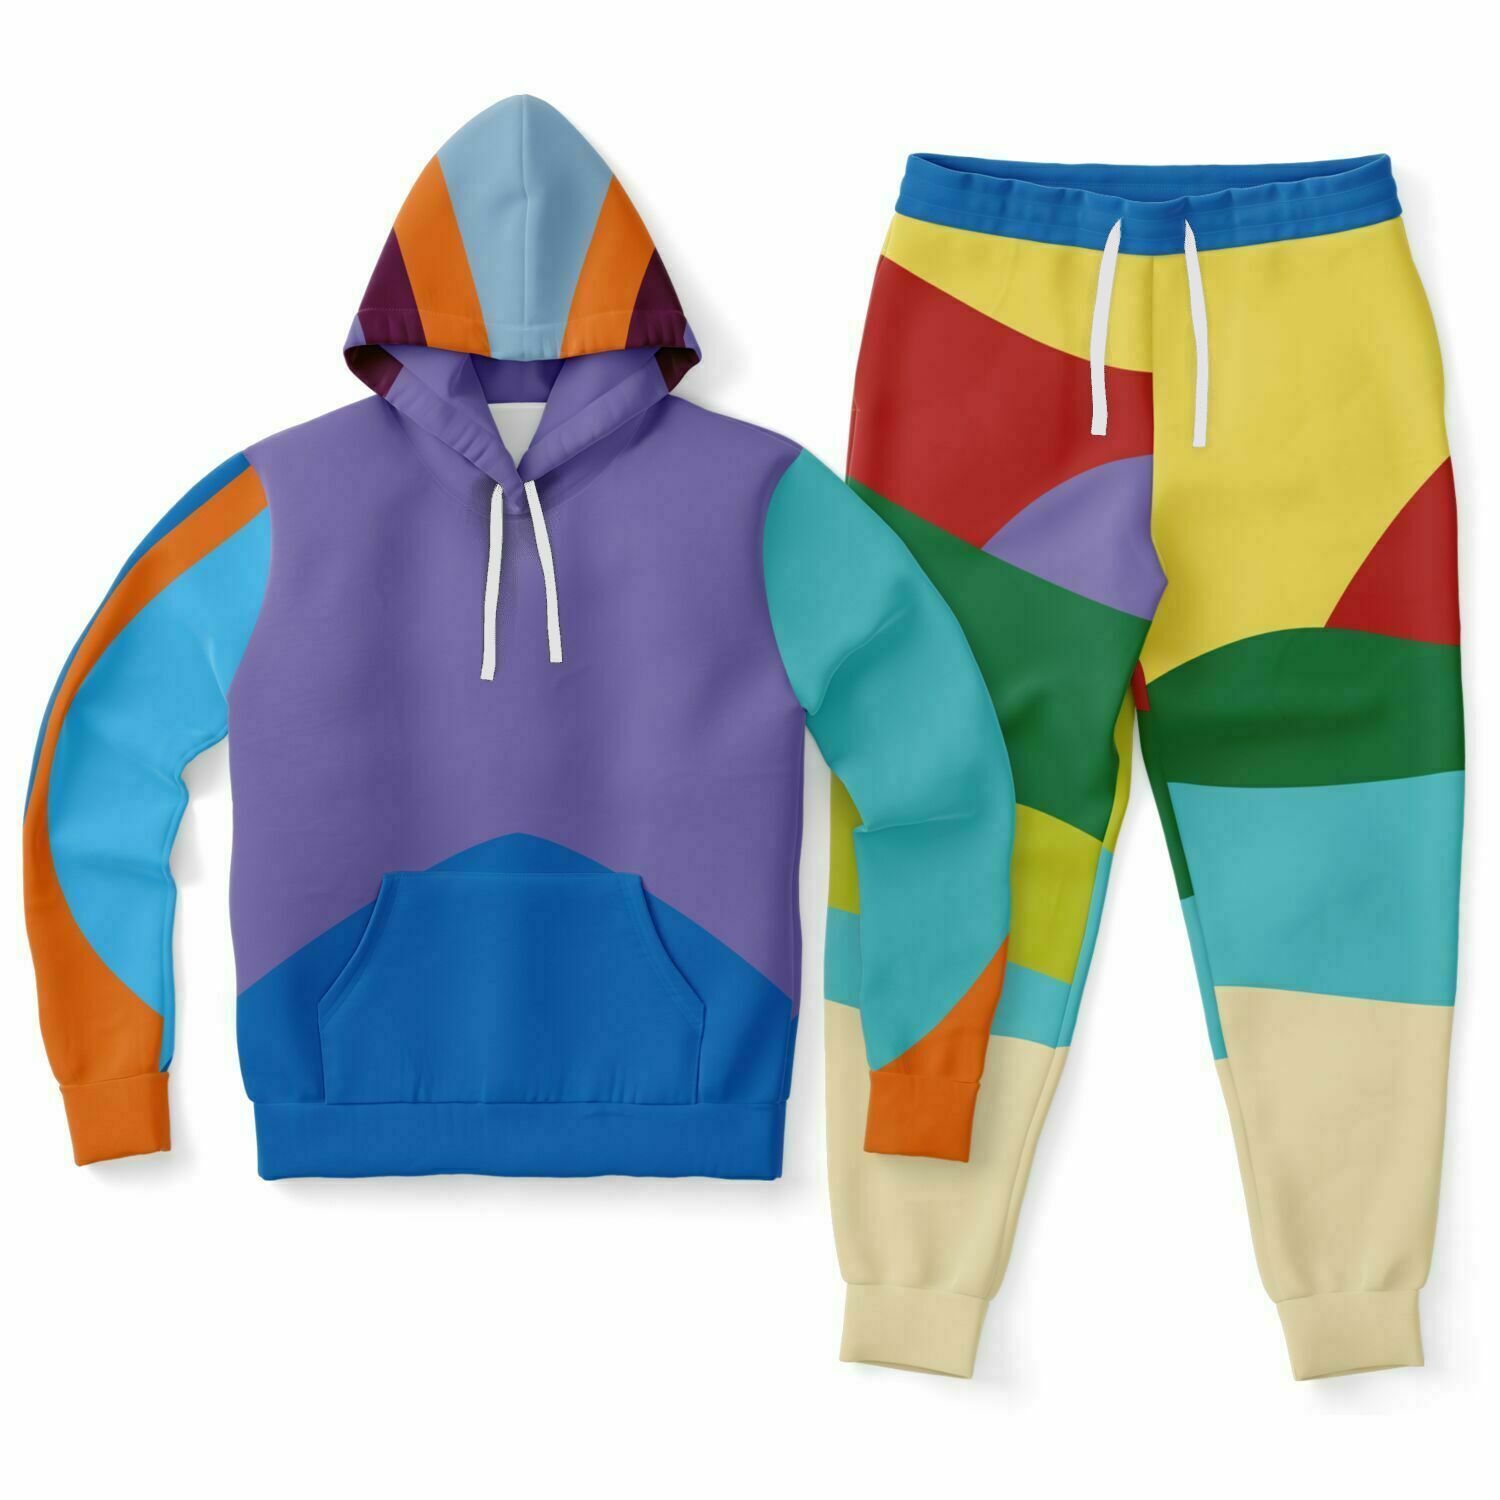 All Hail The Whale hoodie and Jogger Set